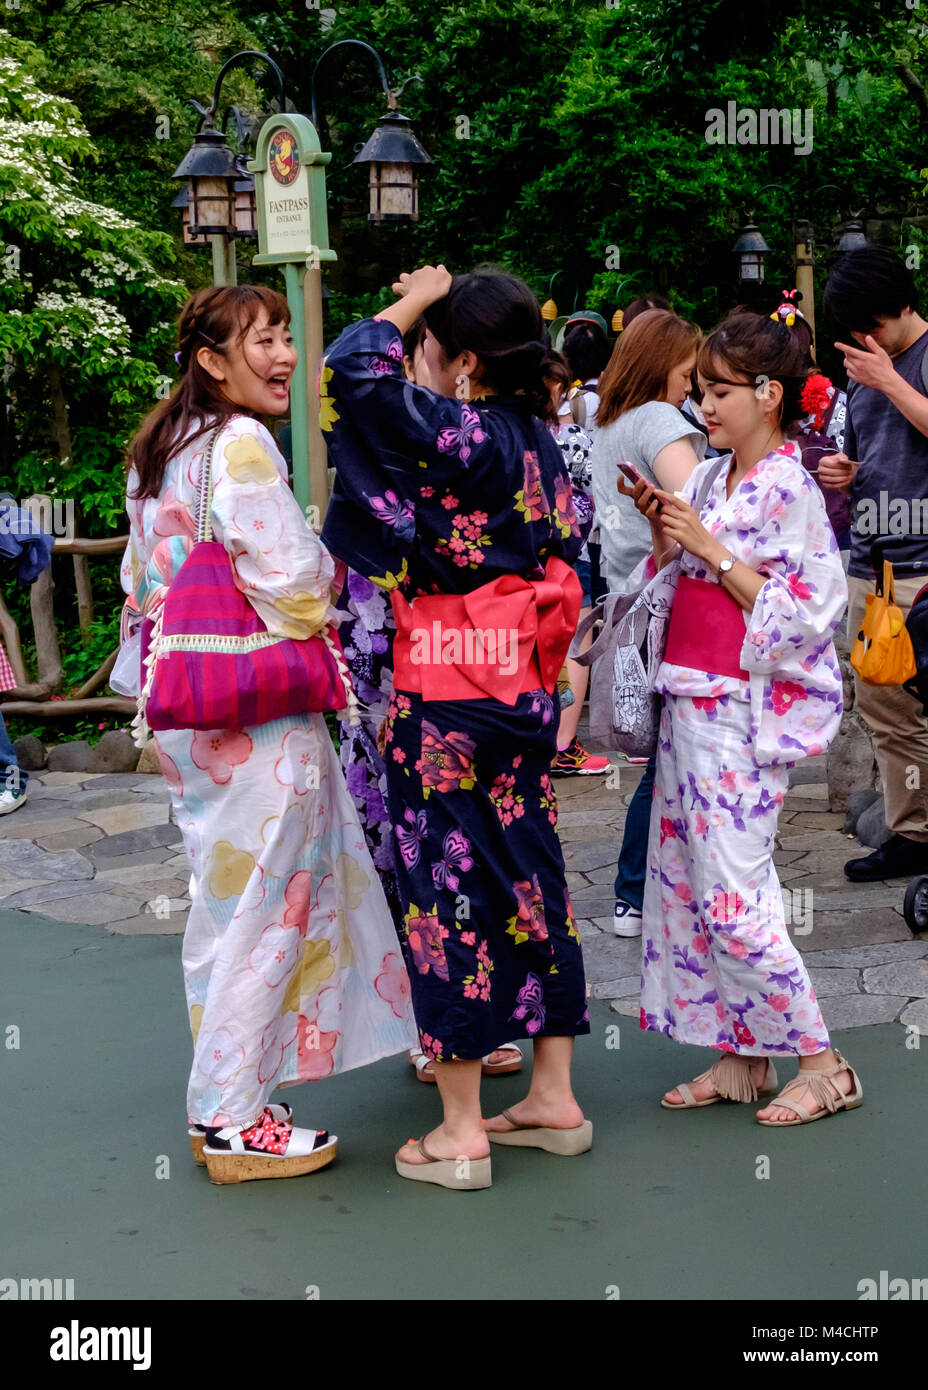 Three Japanese young girls dressed in kimonos. One is laughing, one is looking at her phone and one has her hand to her head. –At Disneyland Tokyo Stock Photo